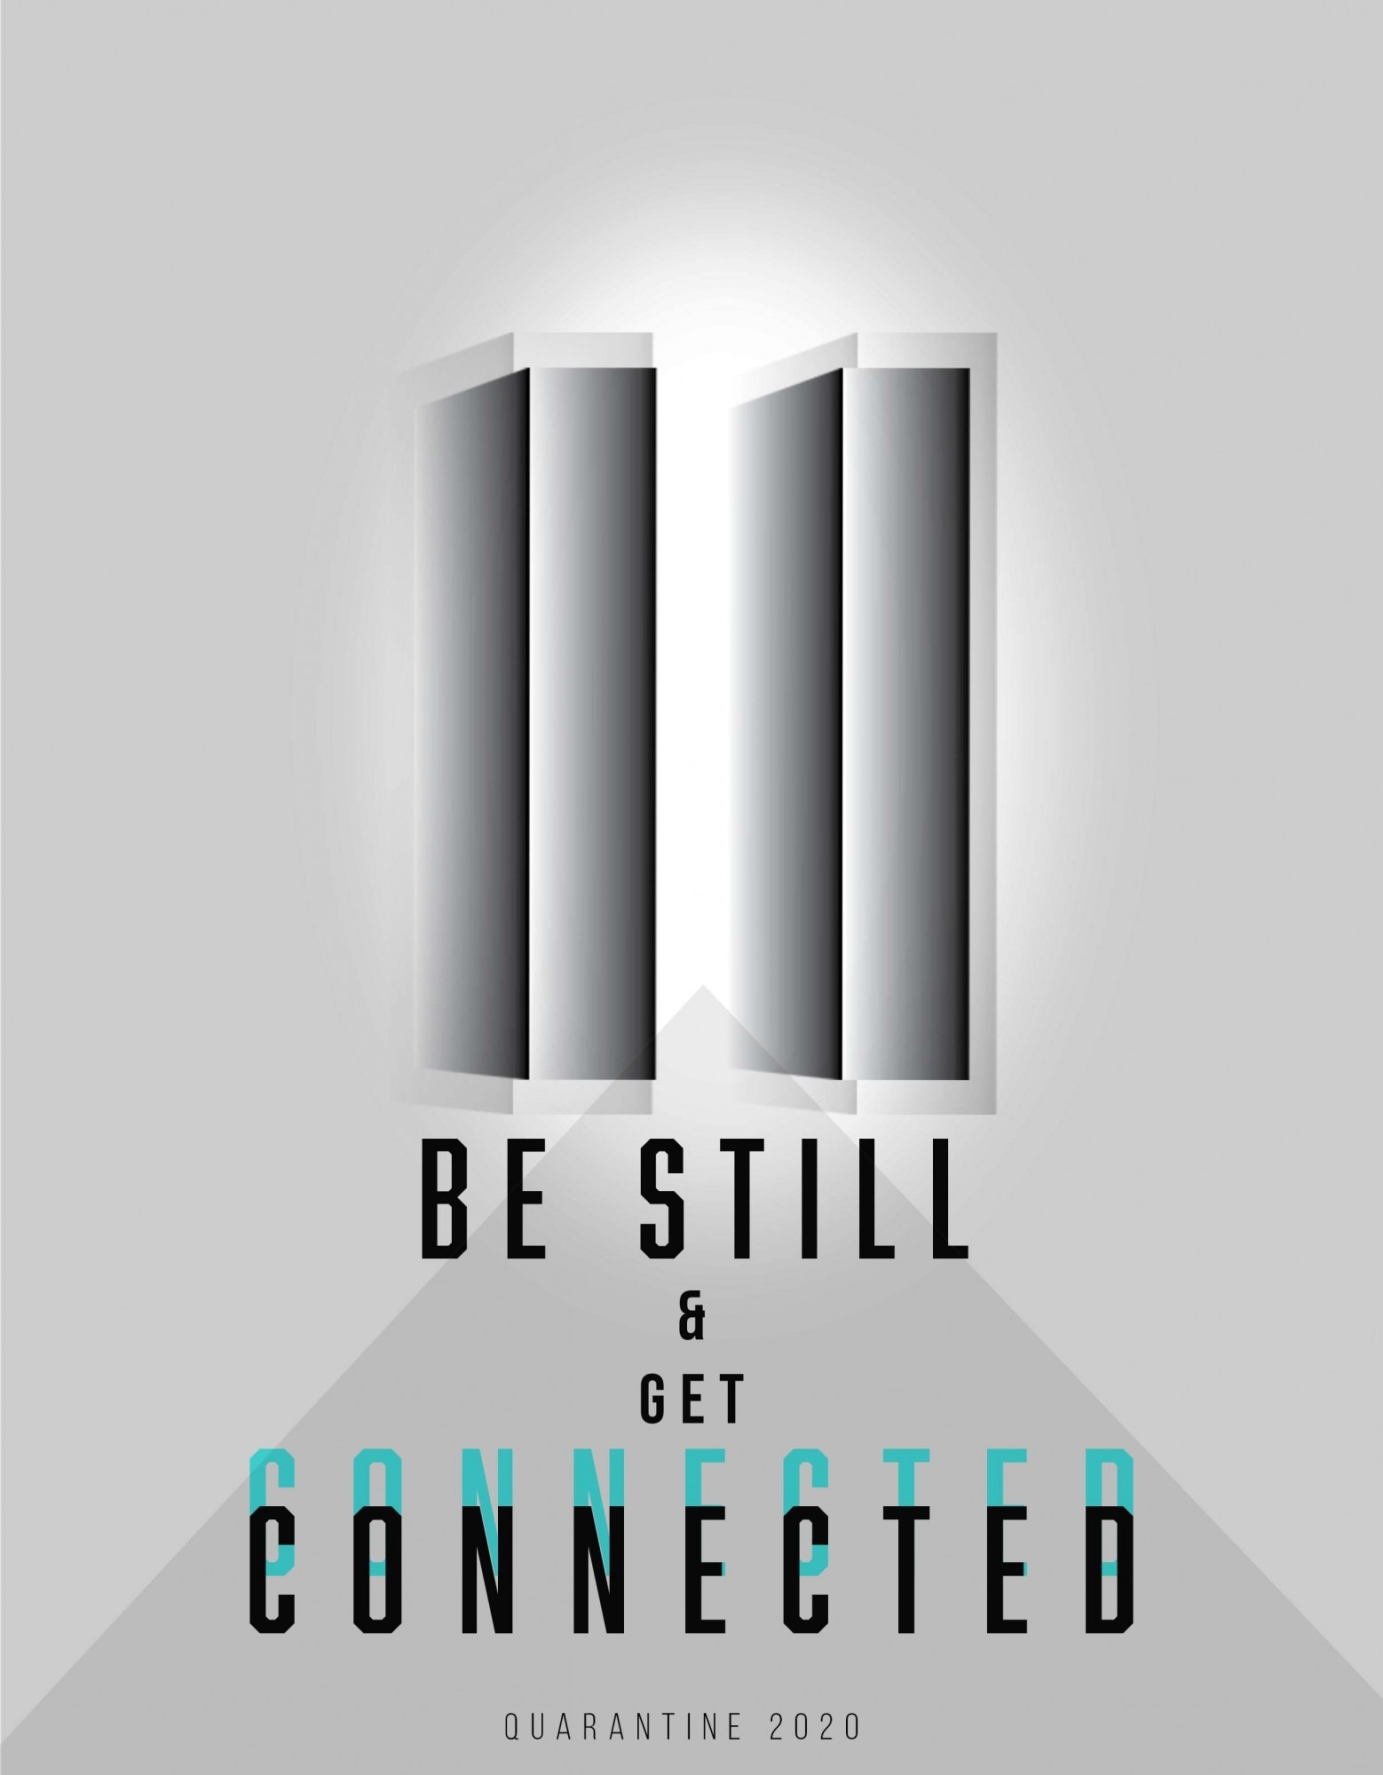 BE STILL & GET CONNECTED